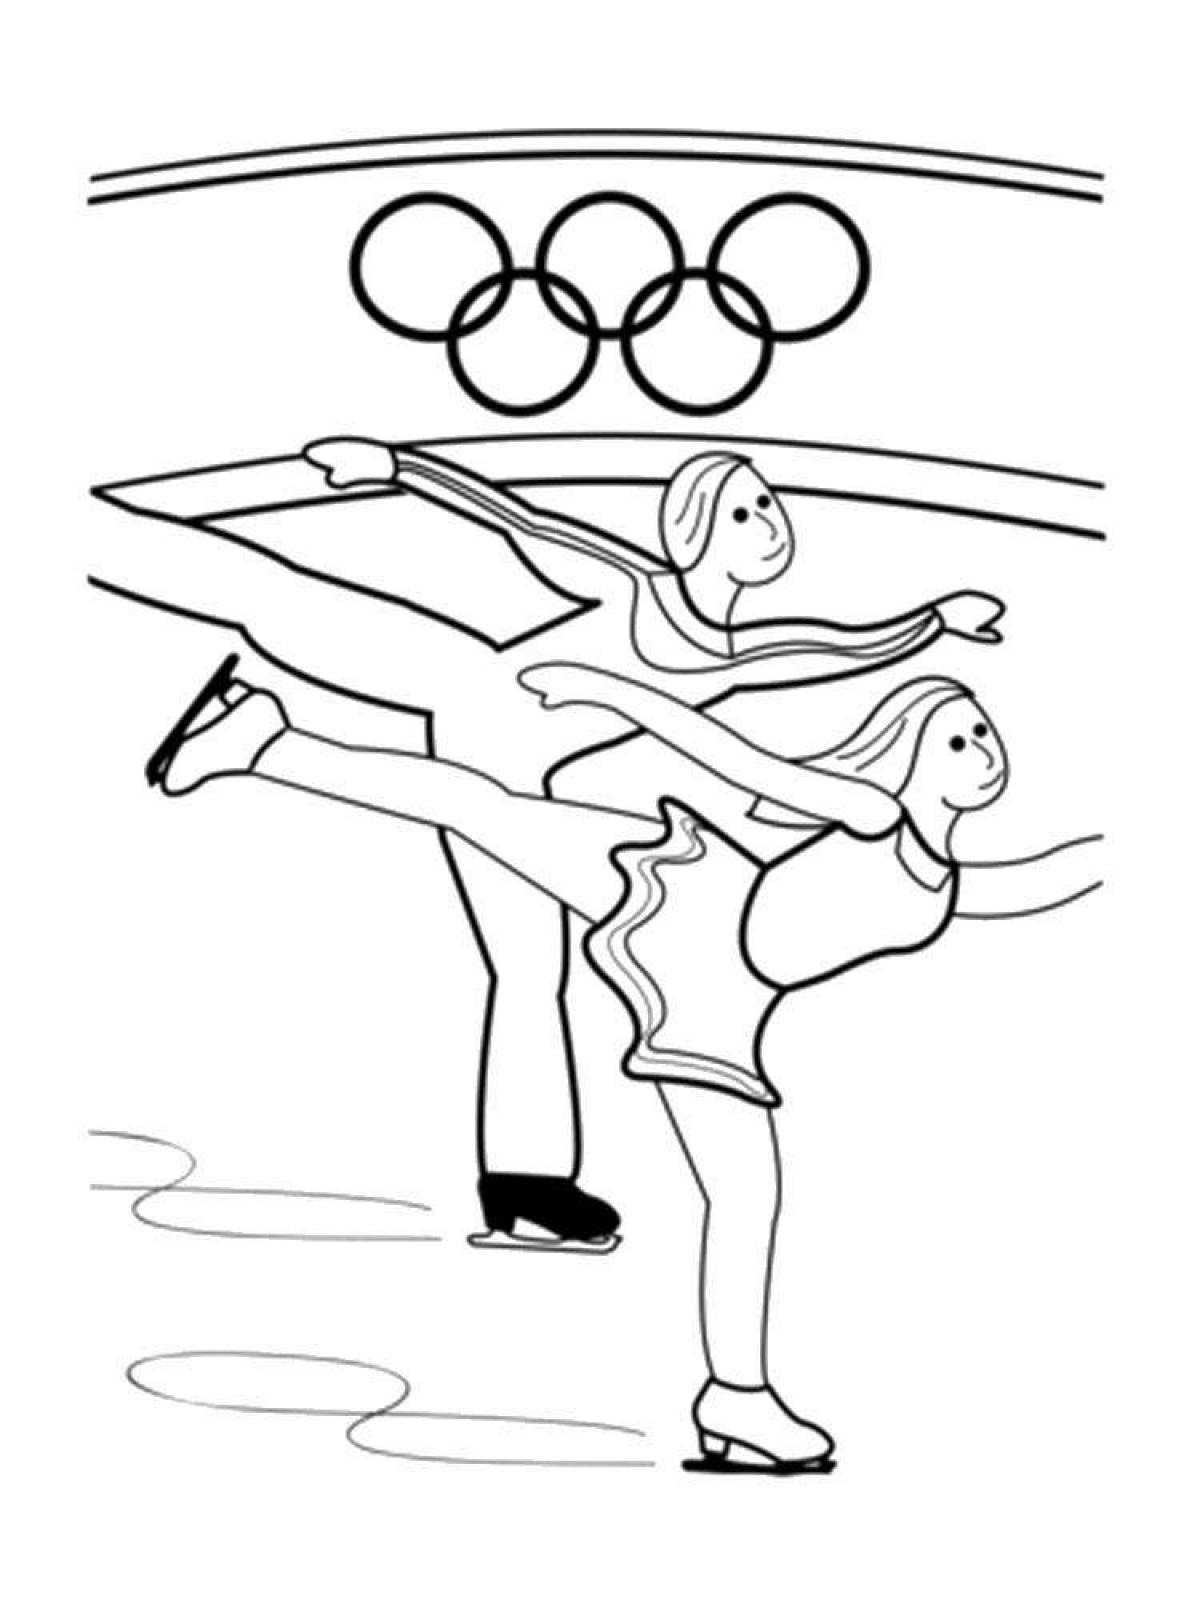 Great figure skating coloring page for kids